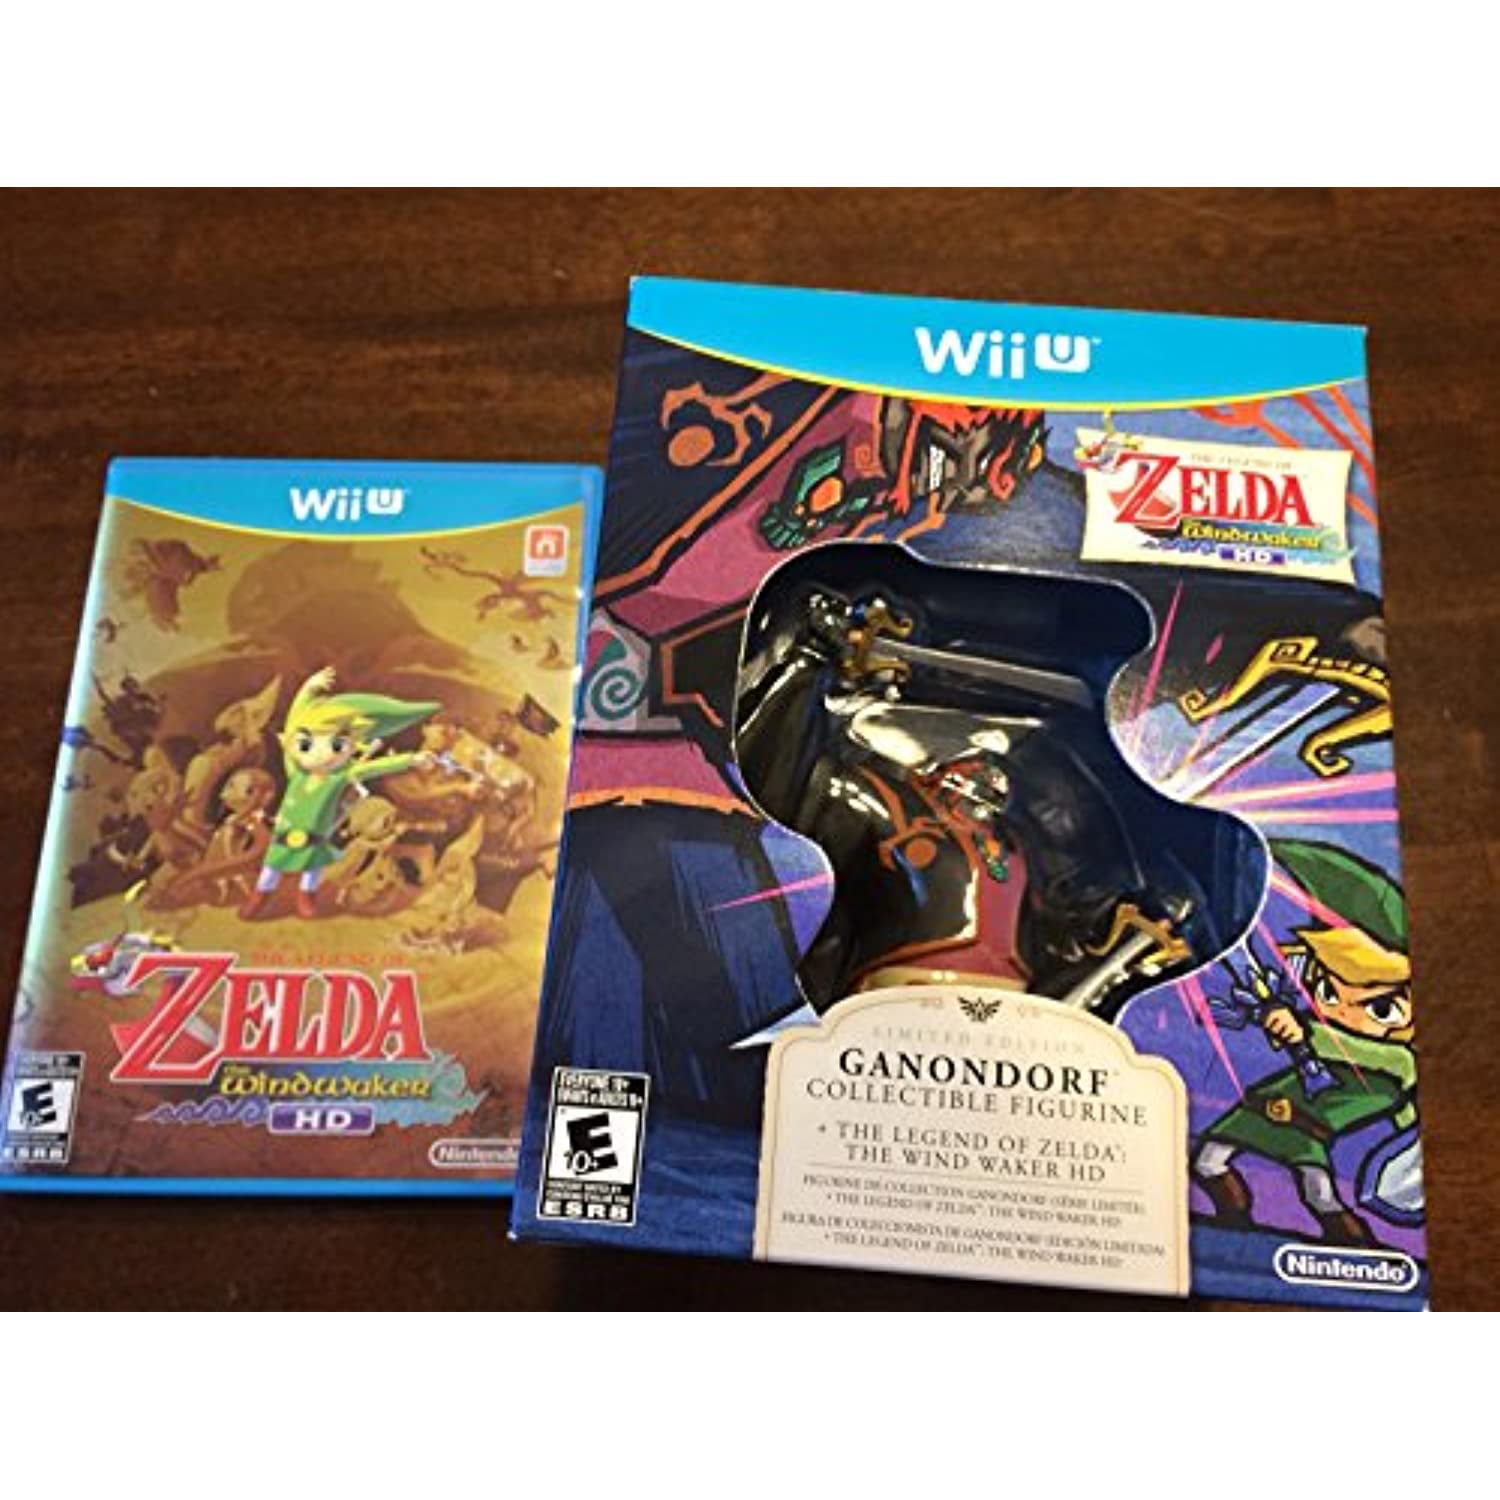 The Legend of Zelda: The Wind Waker HD Limited Edition - Video